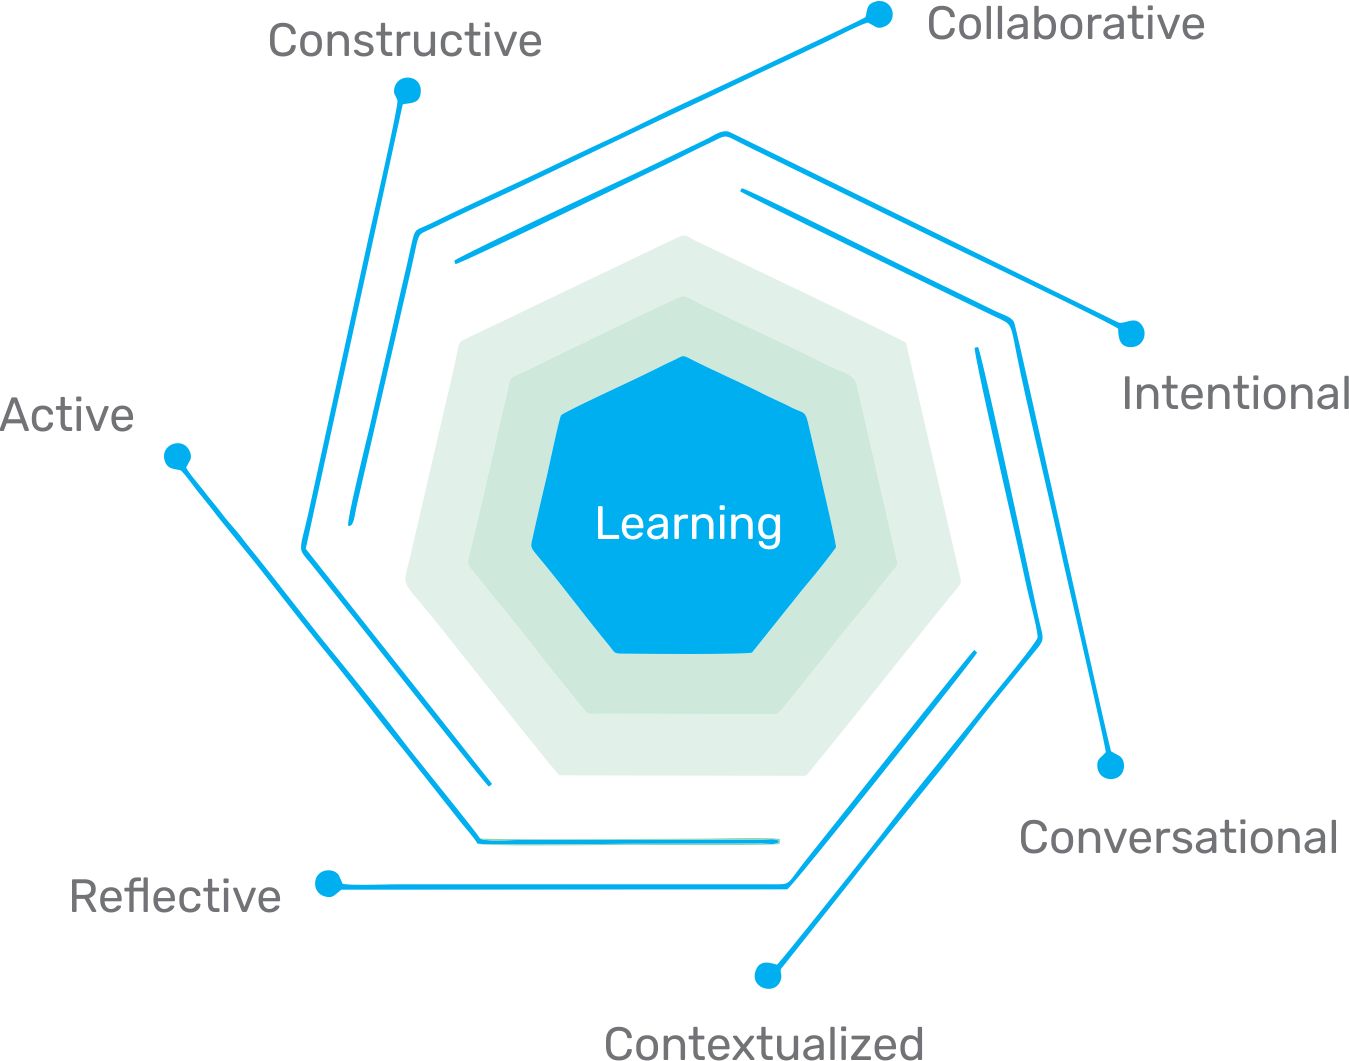 Content-based learning